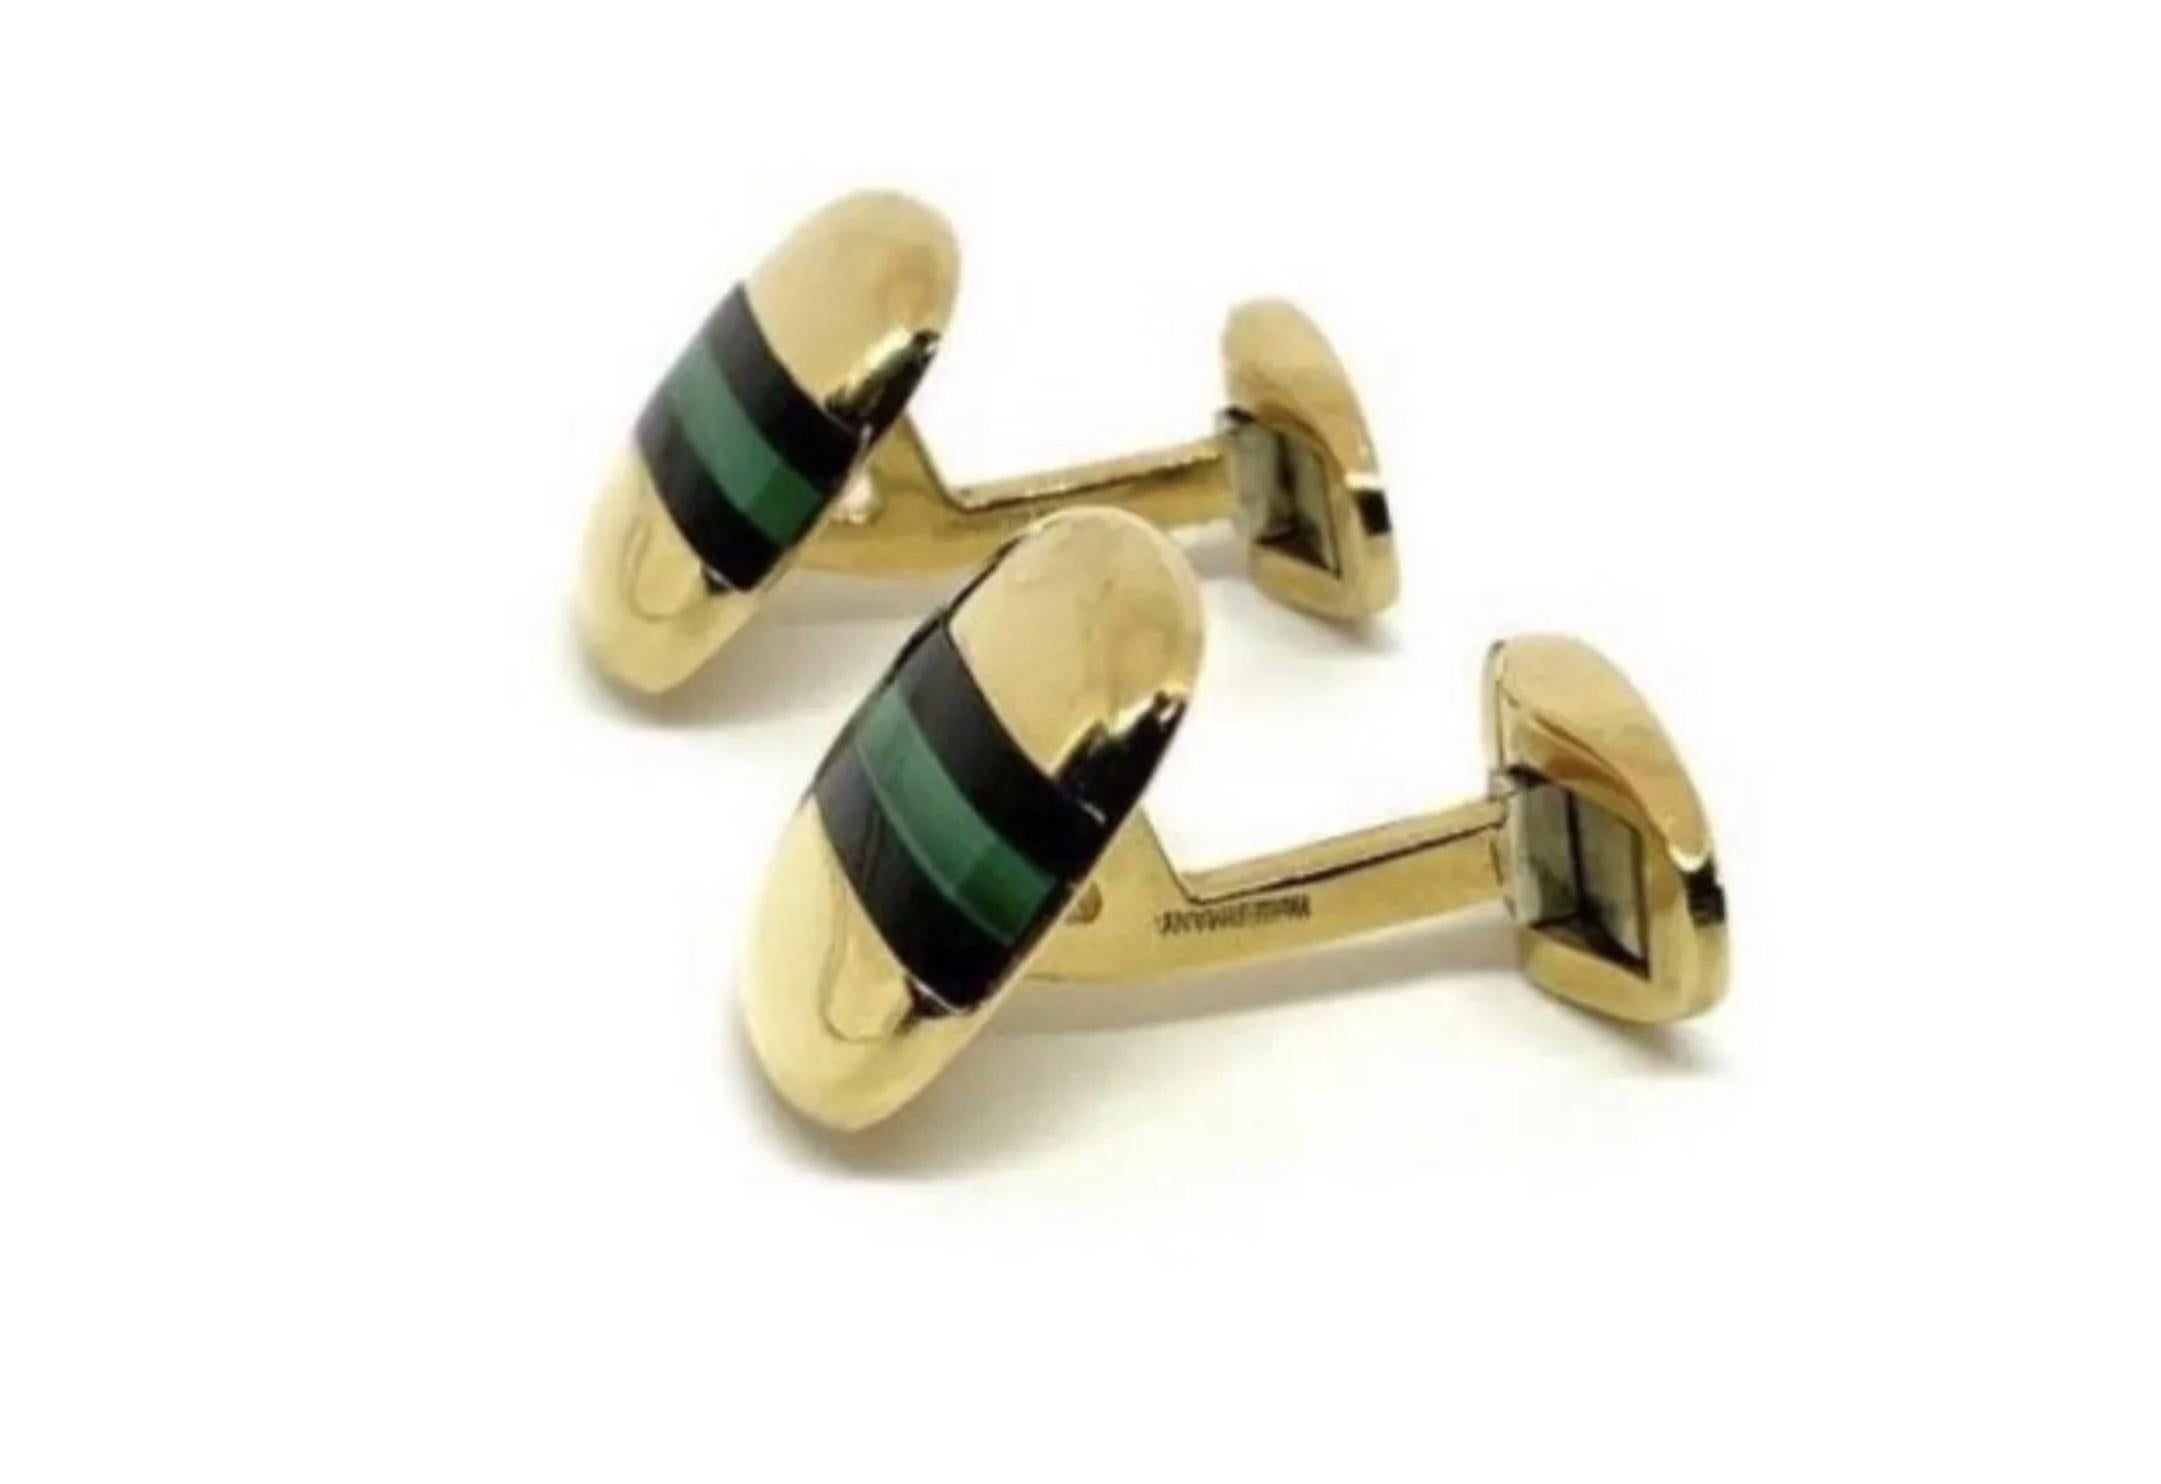 Stunning pair of 18k gold Tiffany & Co. cuff links inset with Malachite & Black Onyx. Signed “18ct - Tiffany & Co. - W-Germany”.  These measure 5/8” by 9/16” & weigh 16.5g. They come in a Tiffany & Co. Holder.


Authenticity Guarantee: All of our